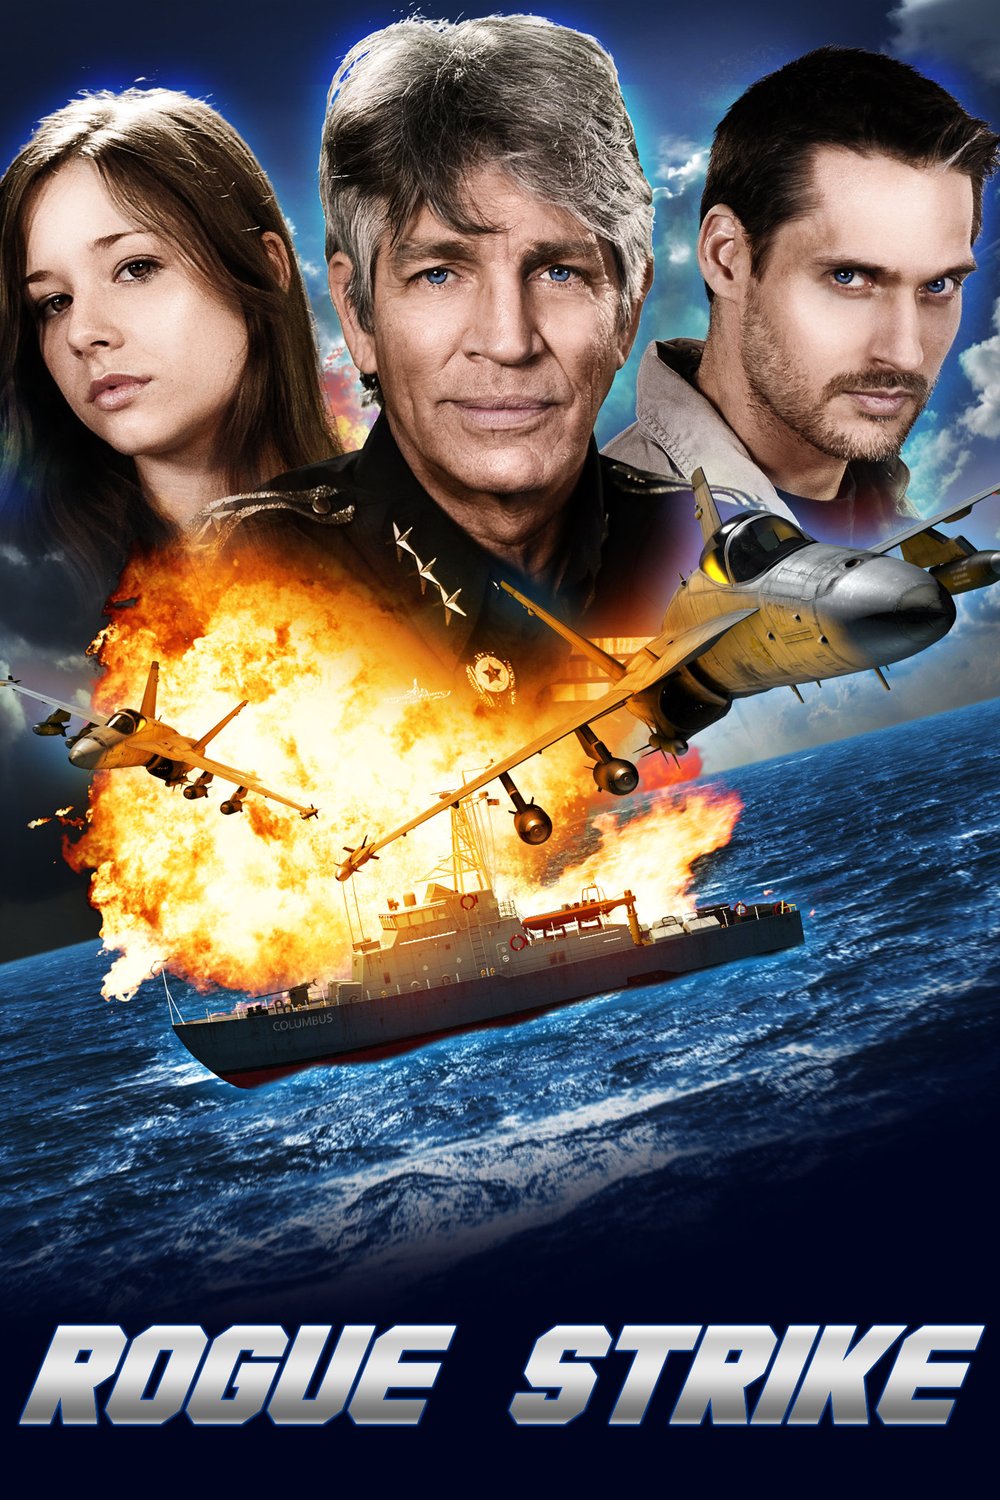 Poster of the movie Rogue Strike